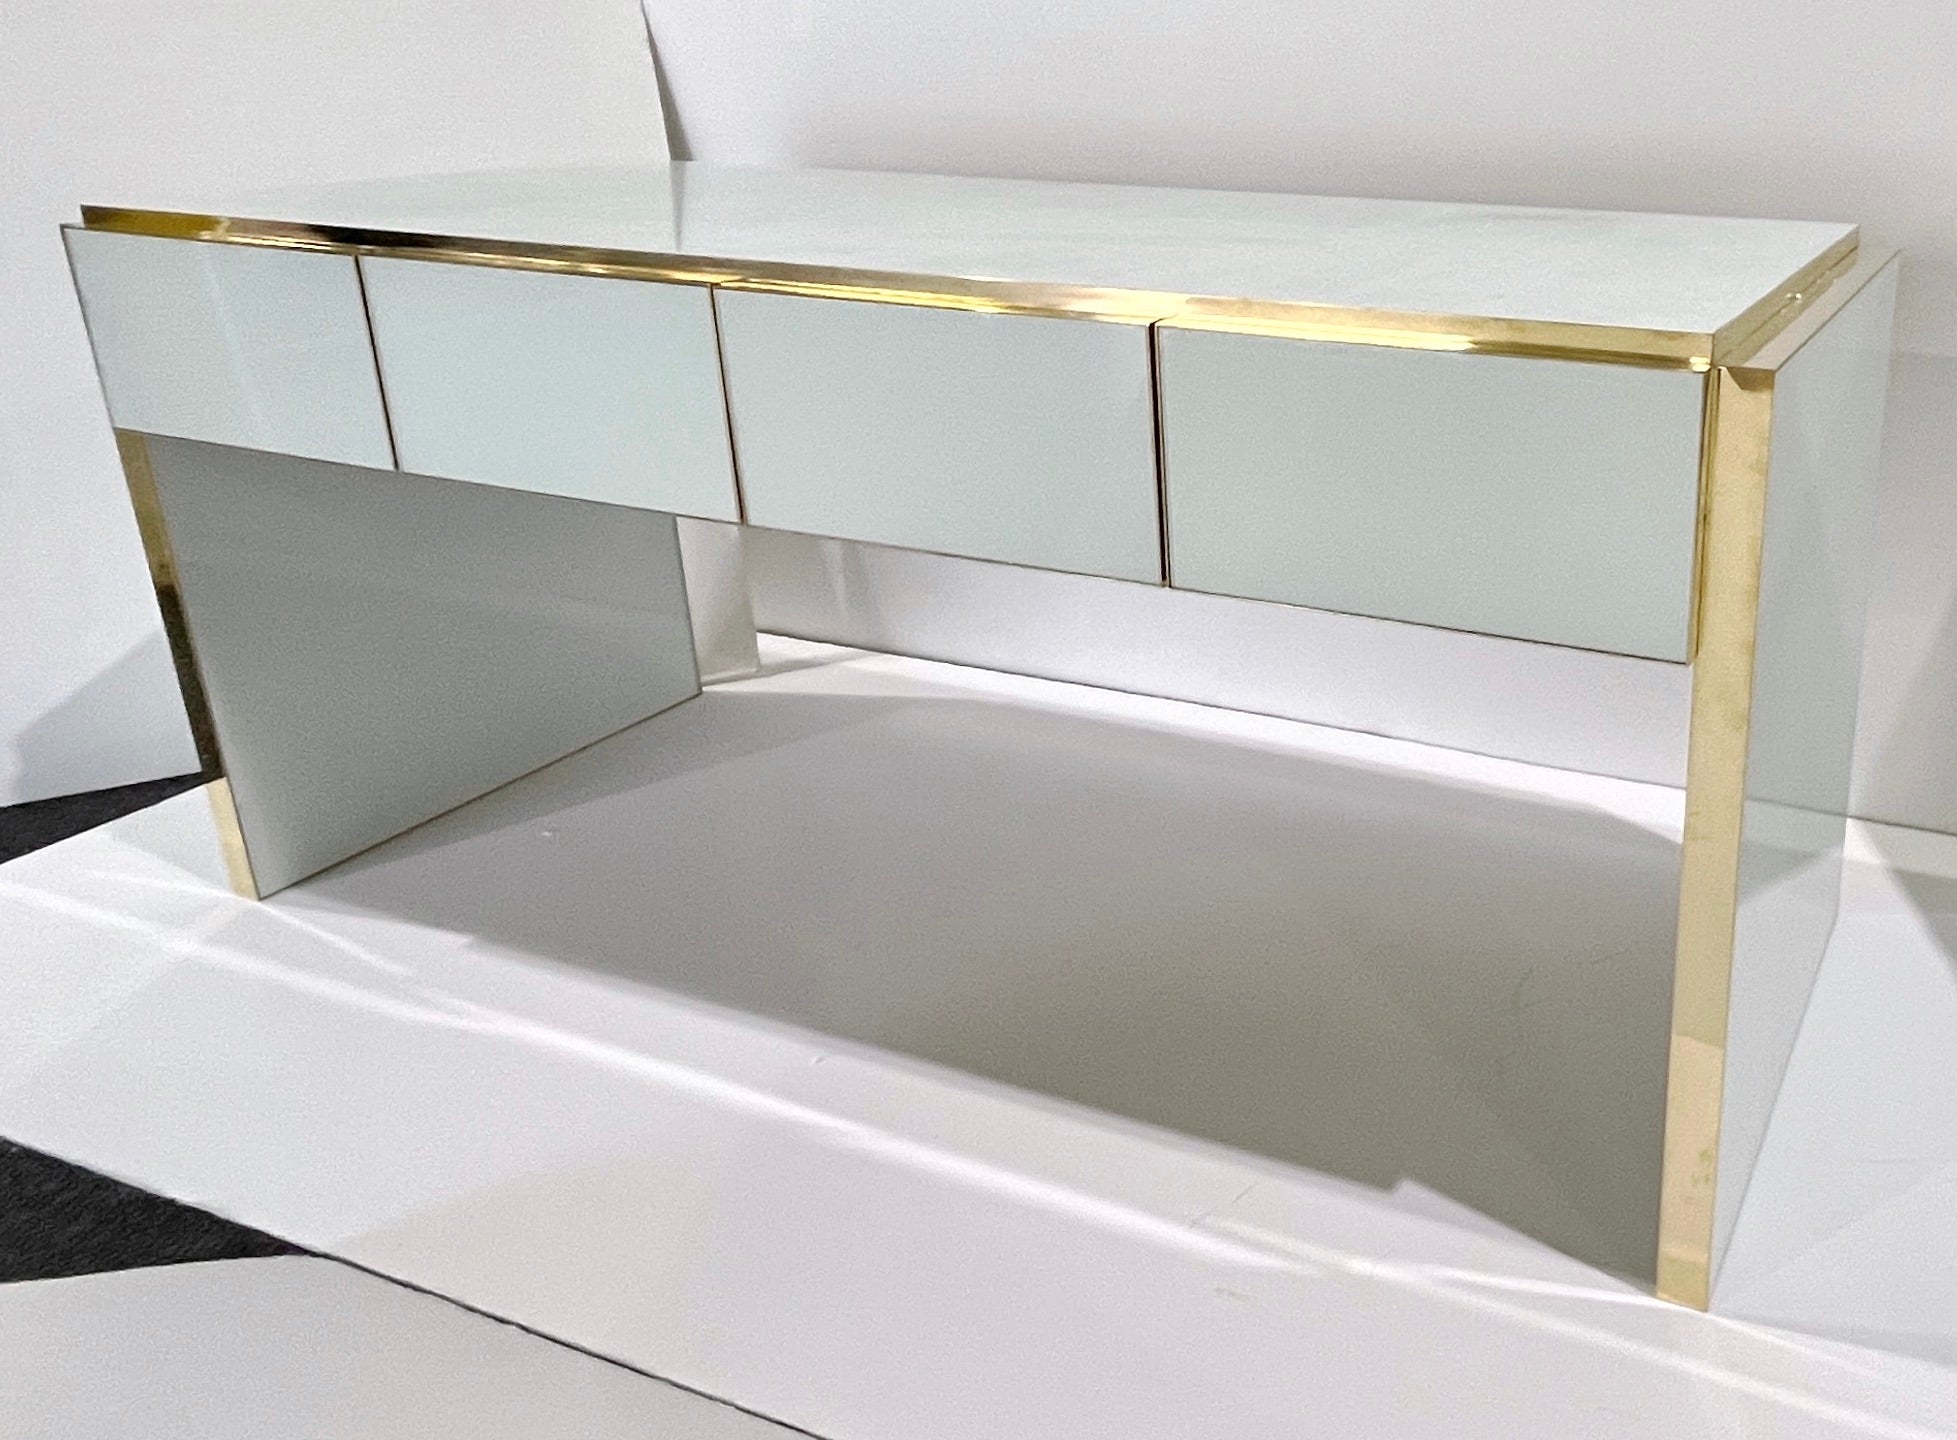 Contemporary Bespoke customizable 4 drawers modern desk / console entirely Hand Made in Italy, with a minimalist Art Deco Design, the surround decorated with art glass in a striking minimalist white color. This desk, raised on continuous straight